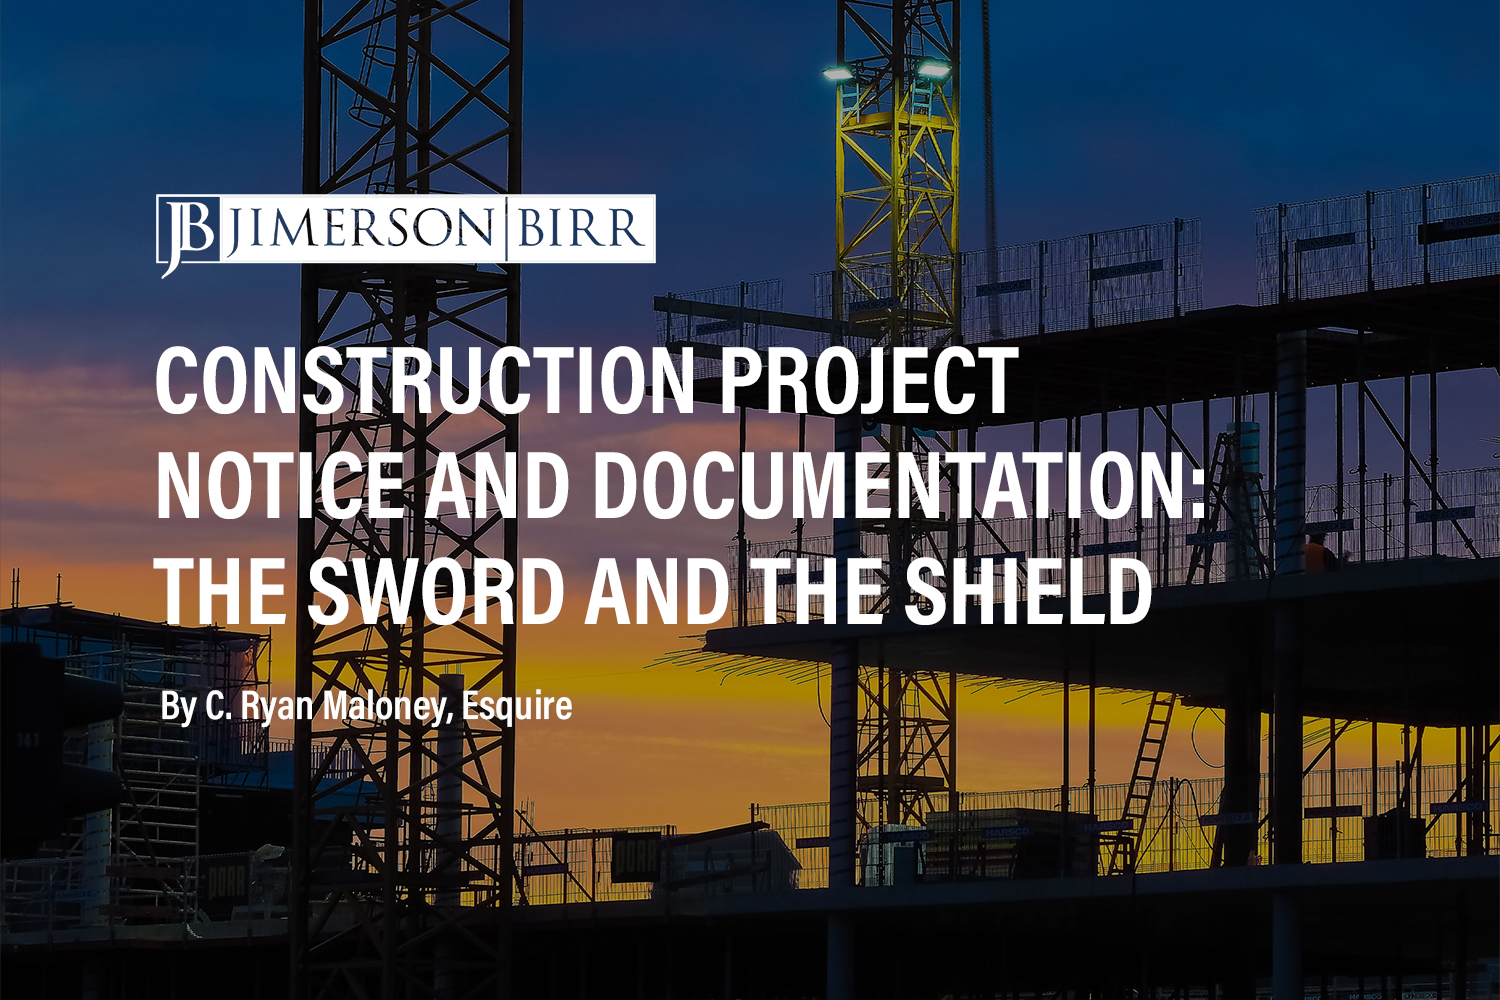 Construction Project Notice and Documentation: The Sword and the Shield